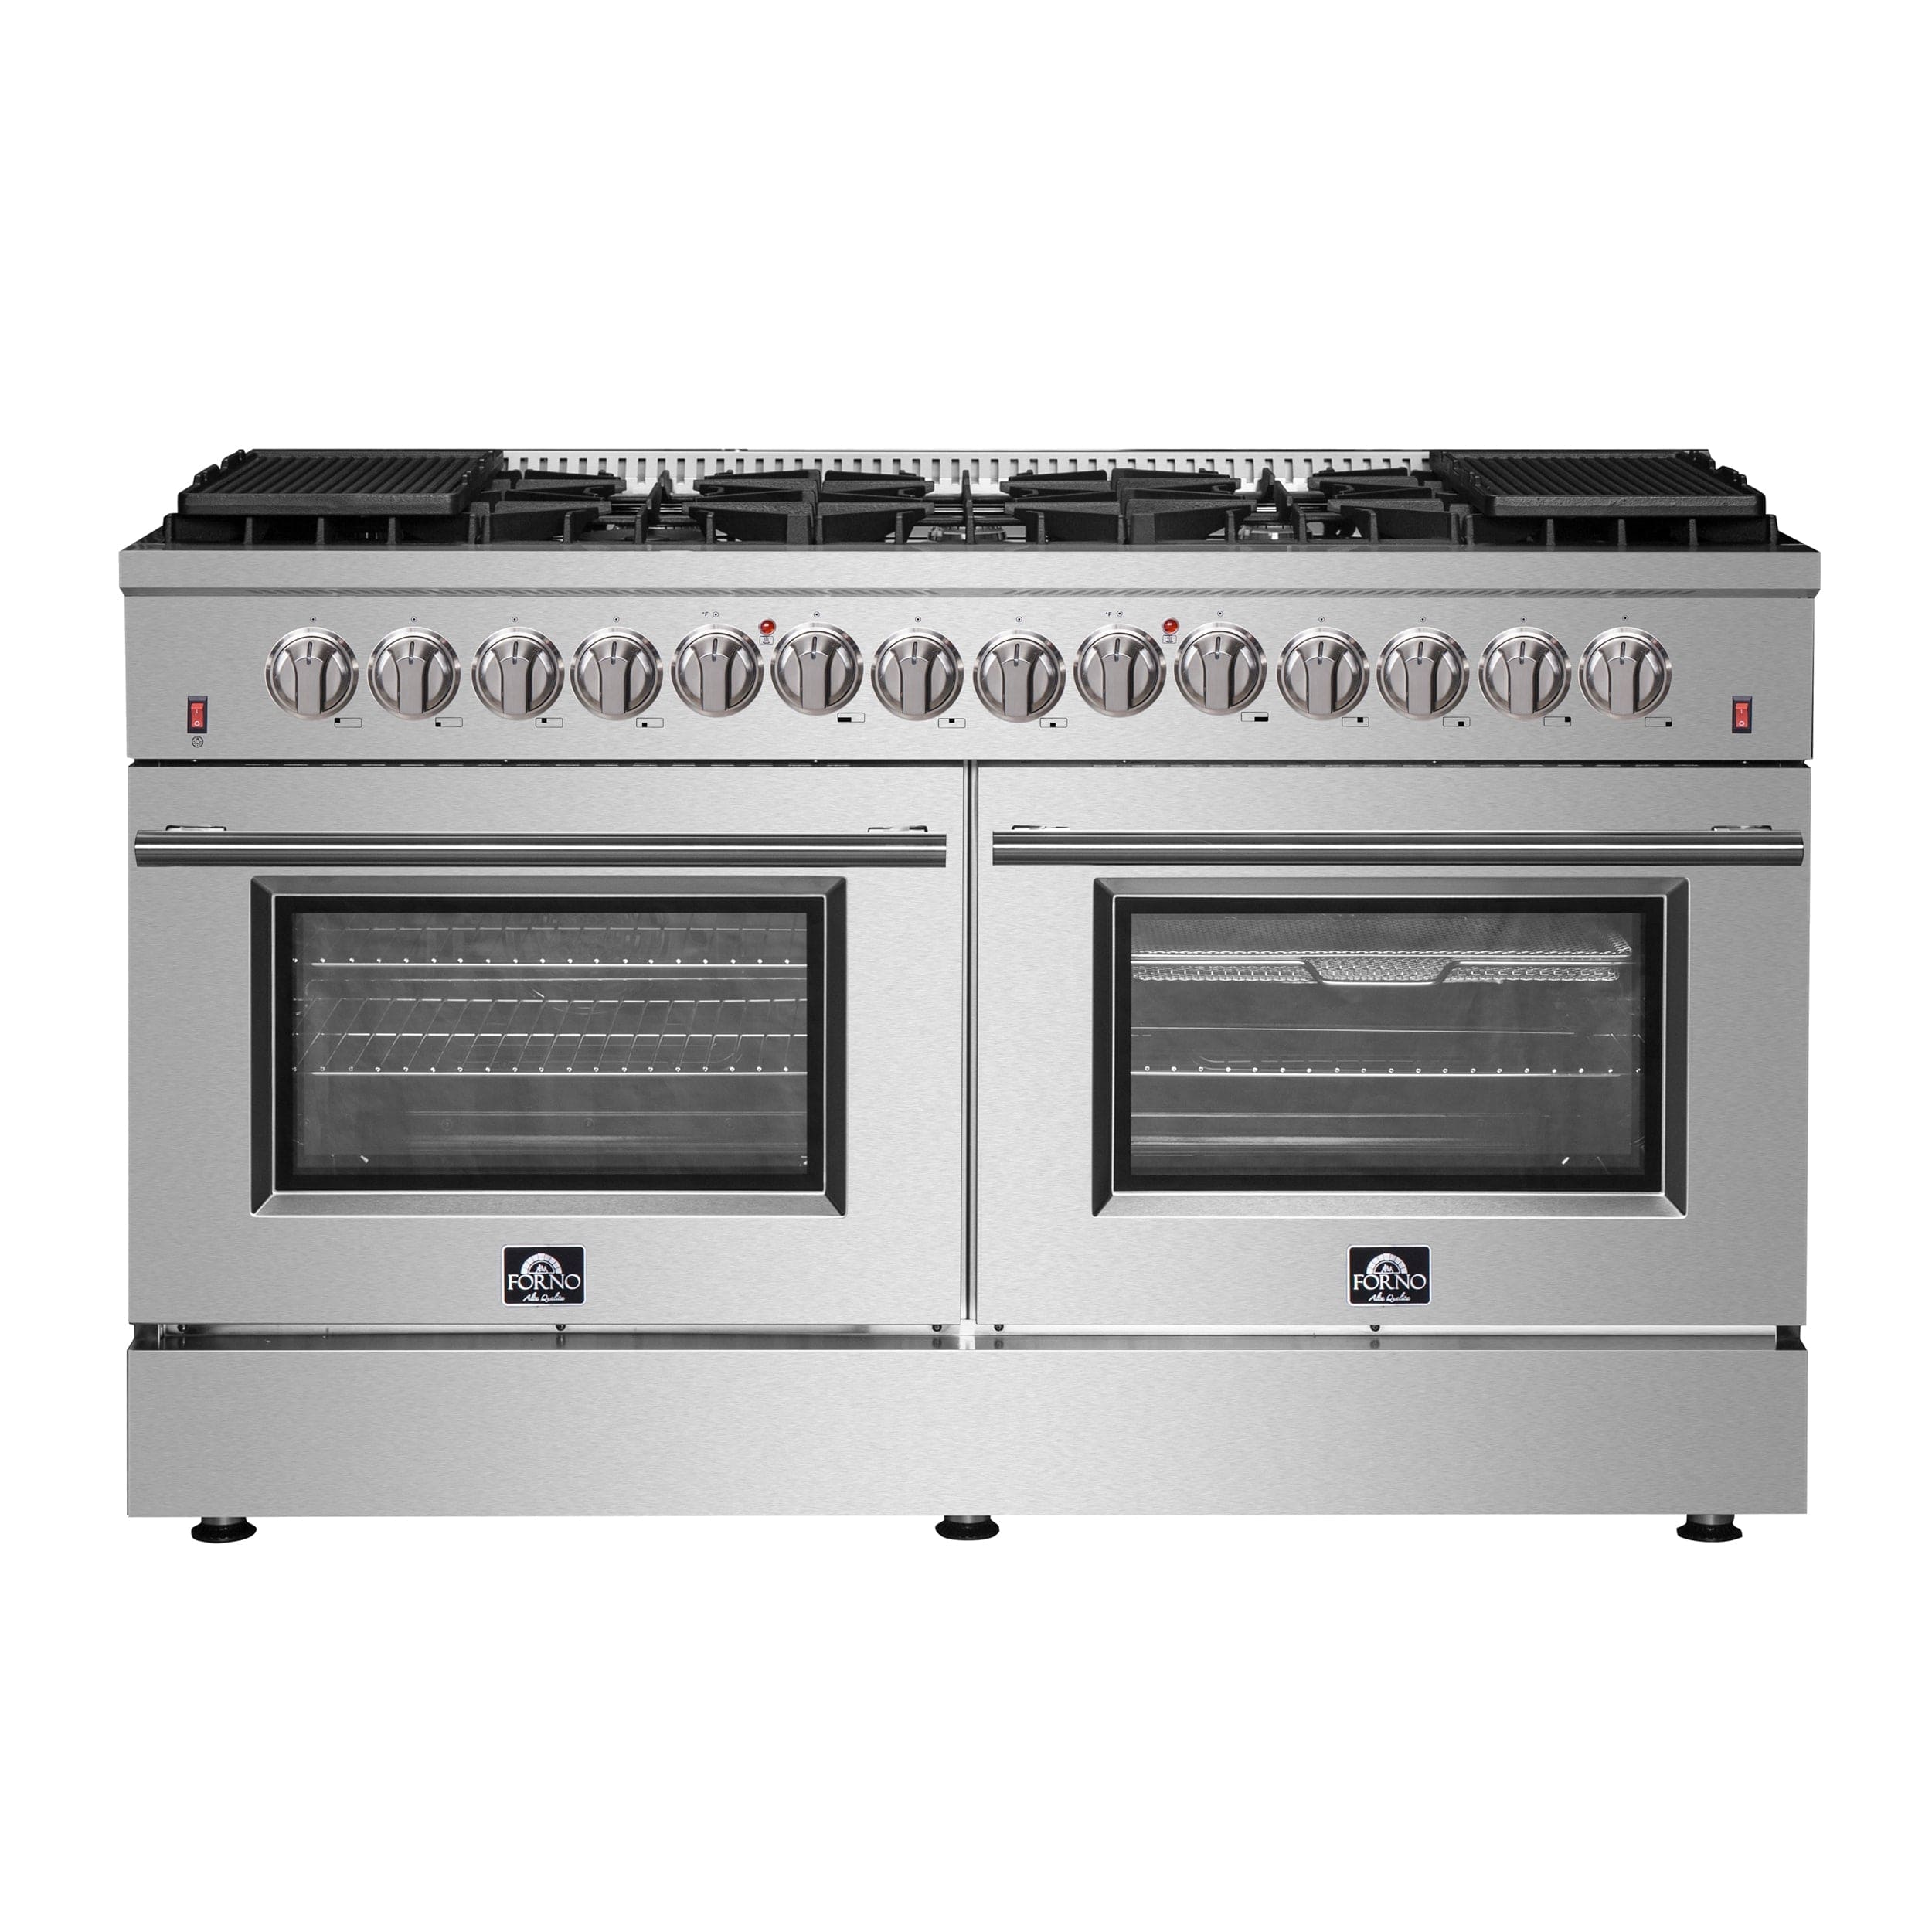 Forno Galiano 60 In. 8.64 cu. ft. Professional Freestanding Dual Fuel Range in Stainless Steel, FFSGS6156-60 Ranges FFSGS6156-60 Luxury Appliances Direct